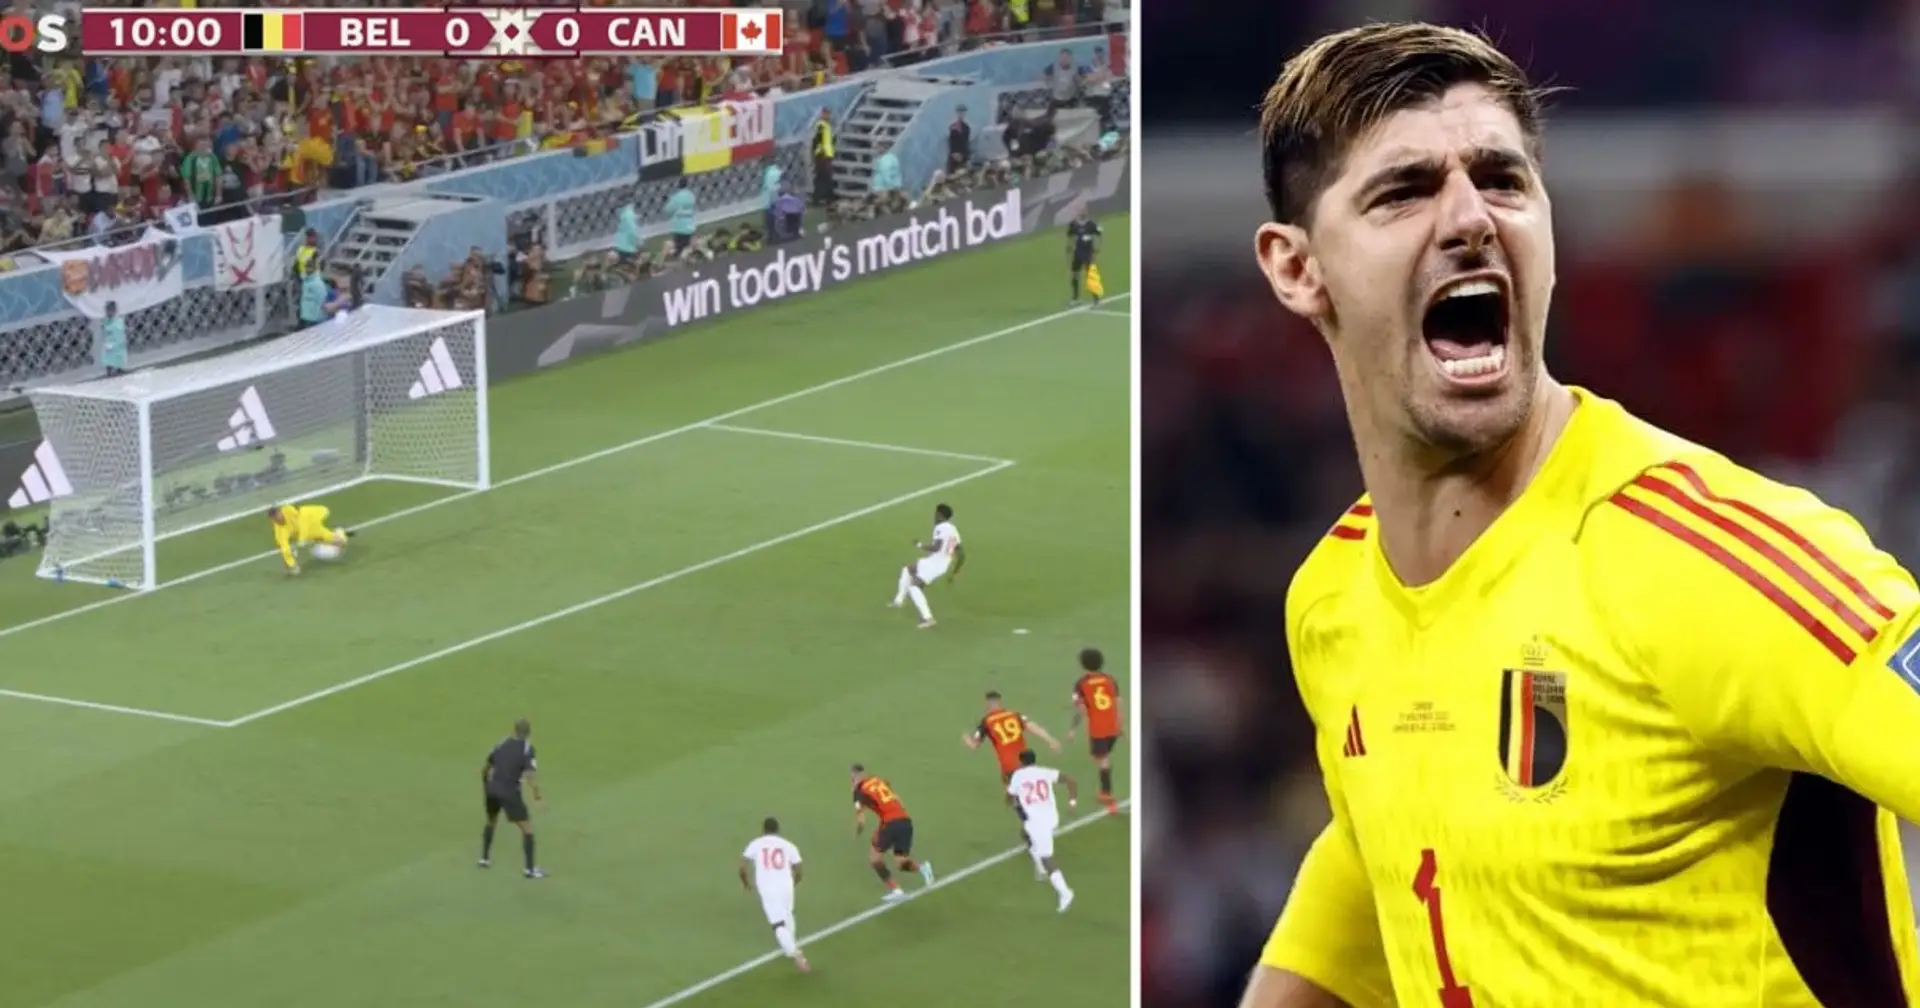 Courtois with MOTM performance, Hazard disappoints: how Madrid players fared v Canada